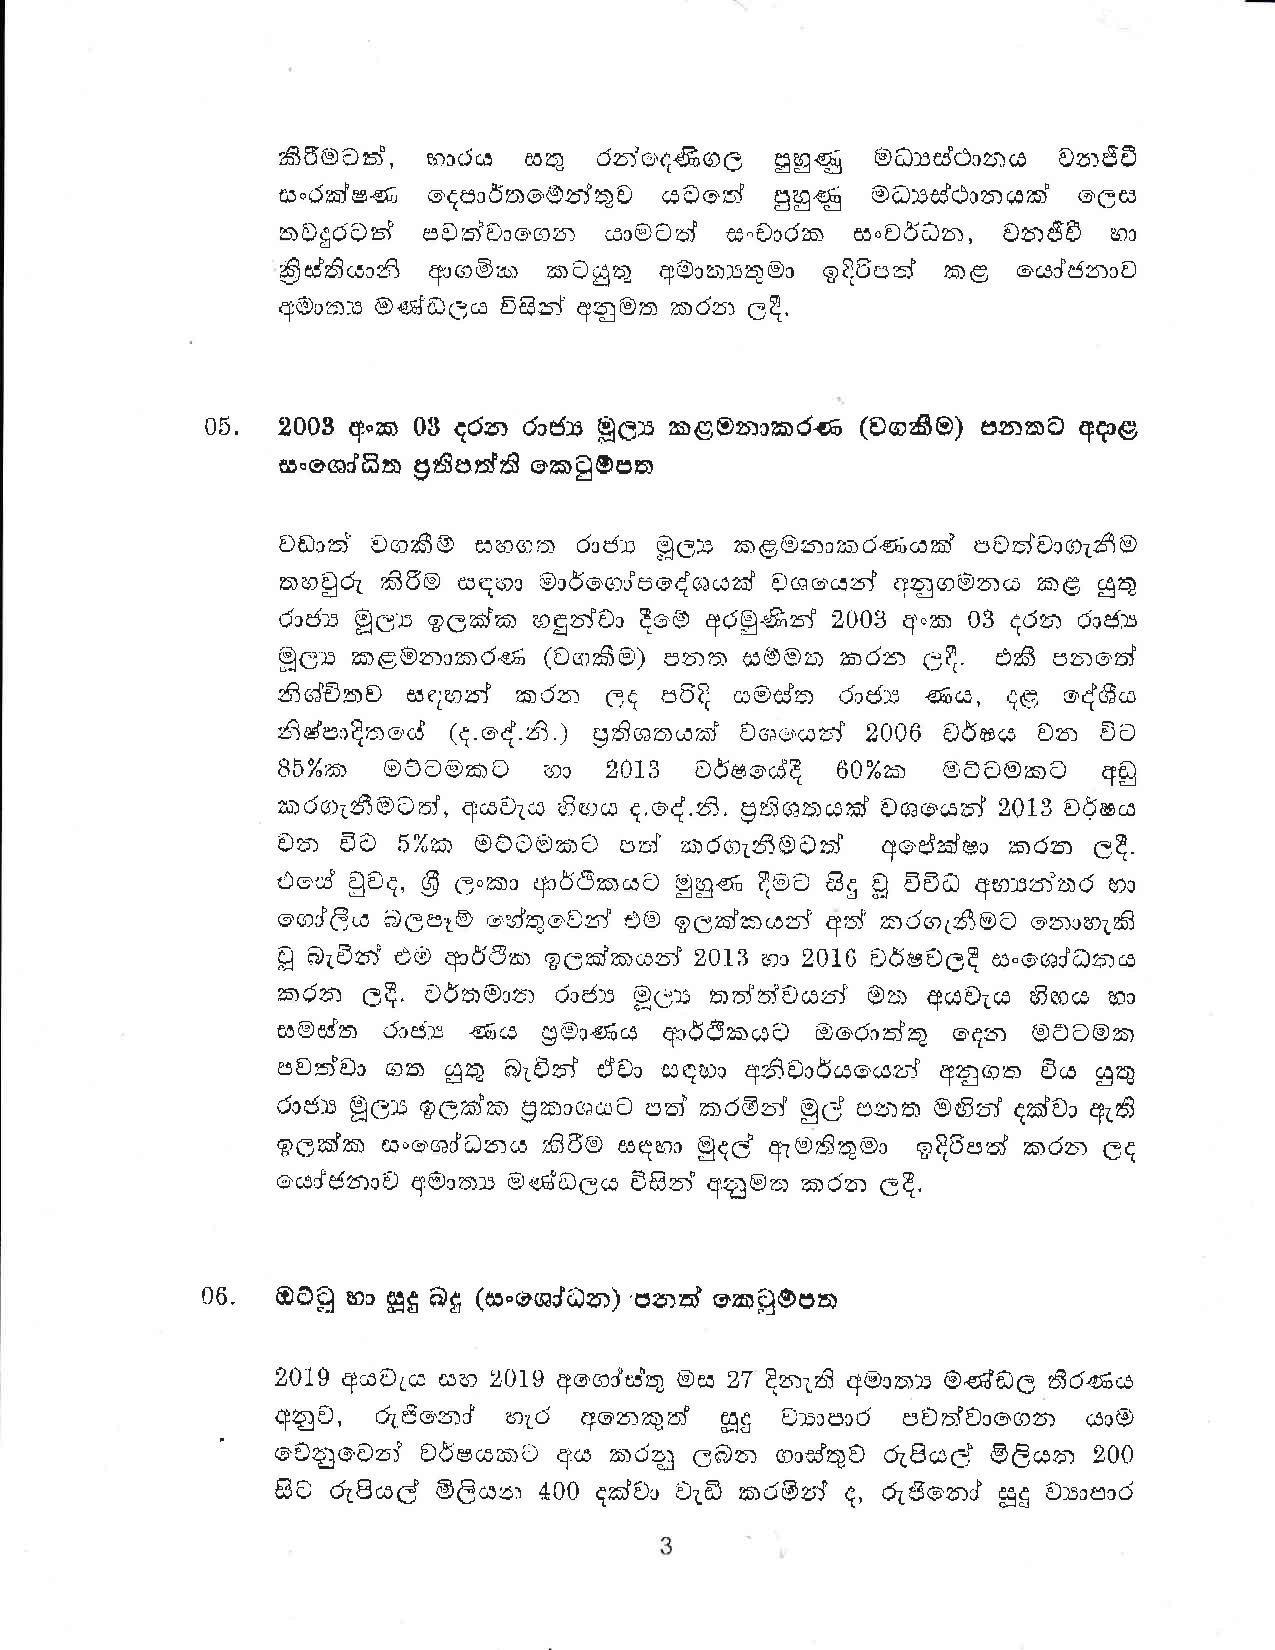 Cabinet Decision on 15.10.2019 page 003